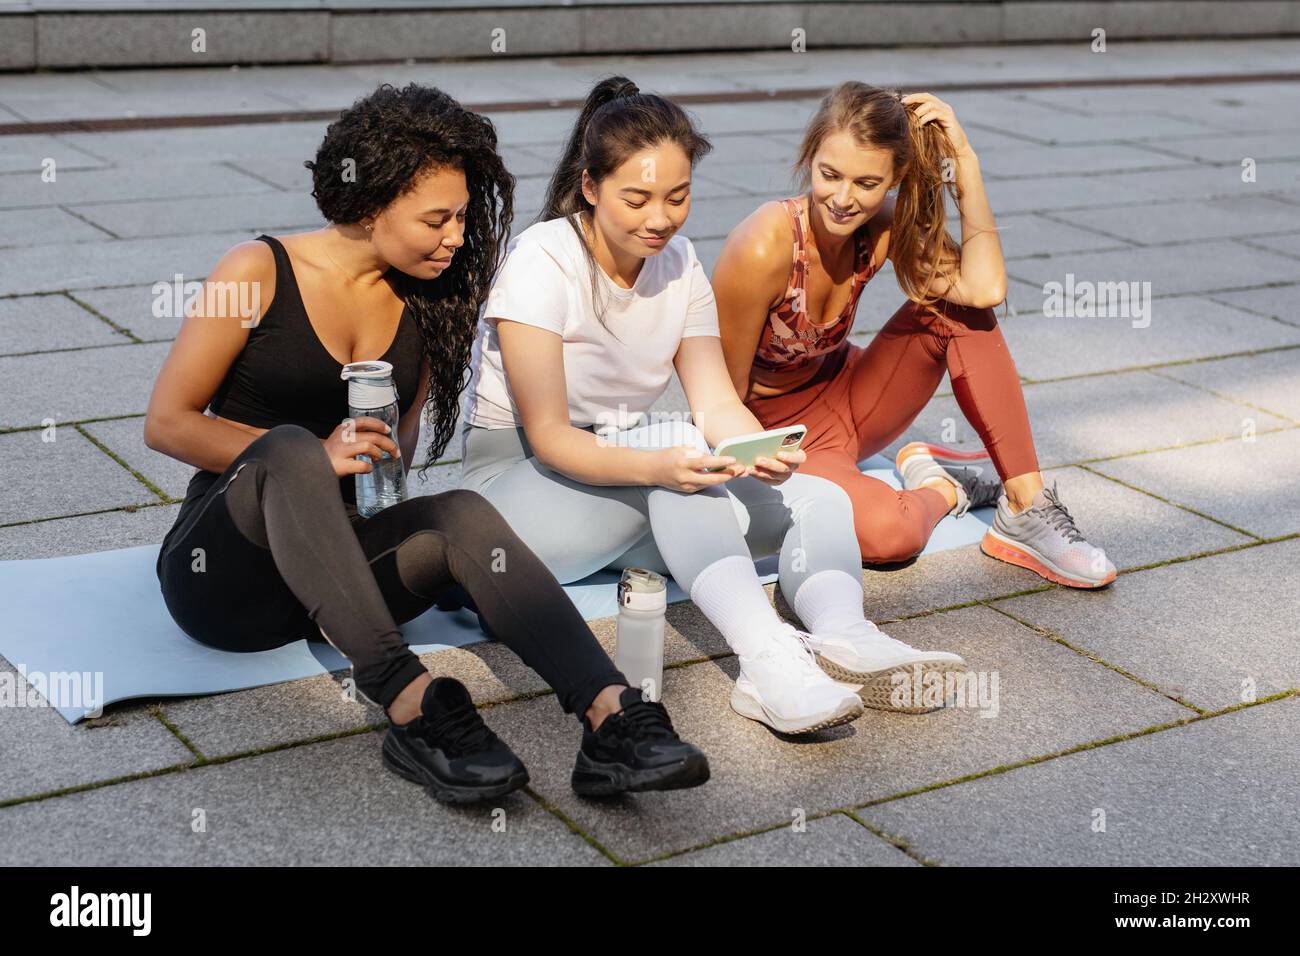 Three sporty women having fun and laughing looking smartphone after urban fitness workout. Stock Photo